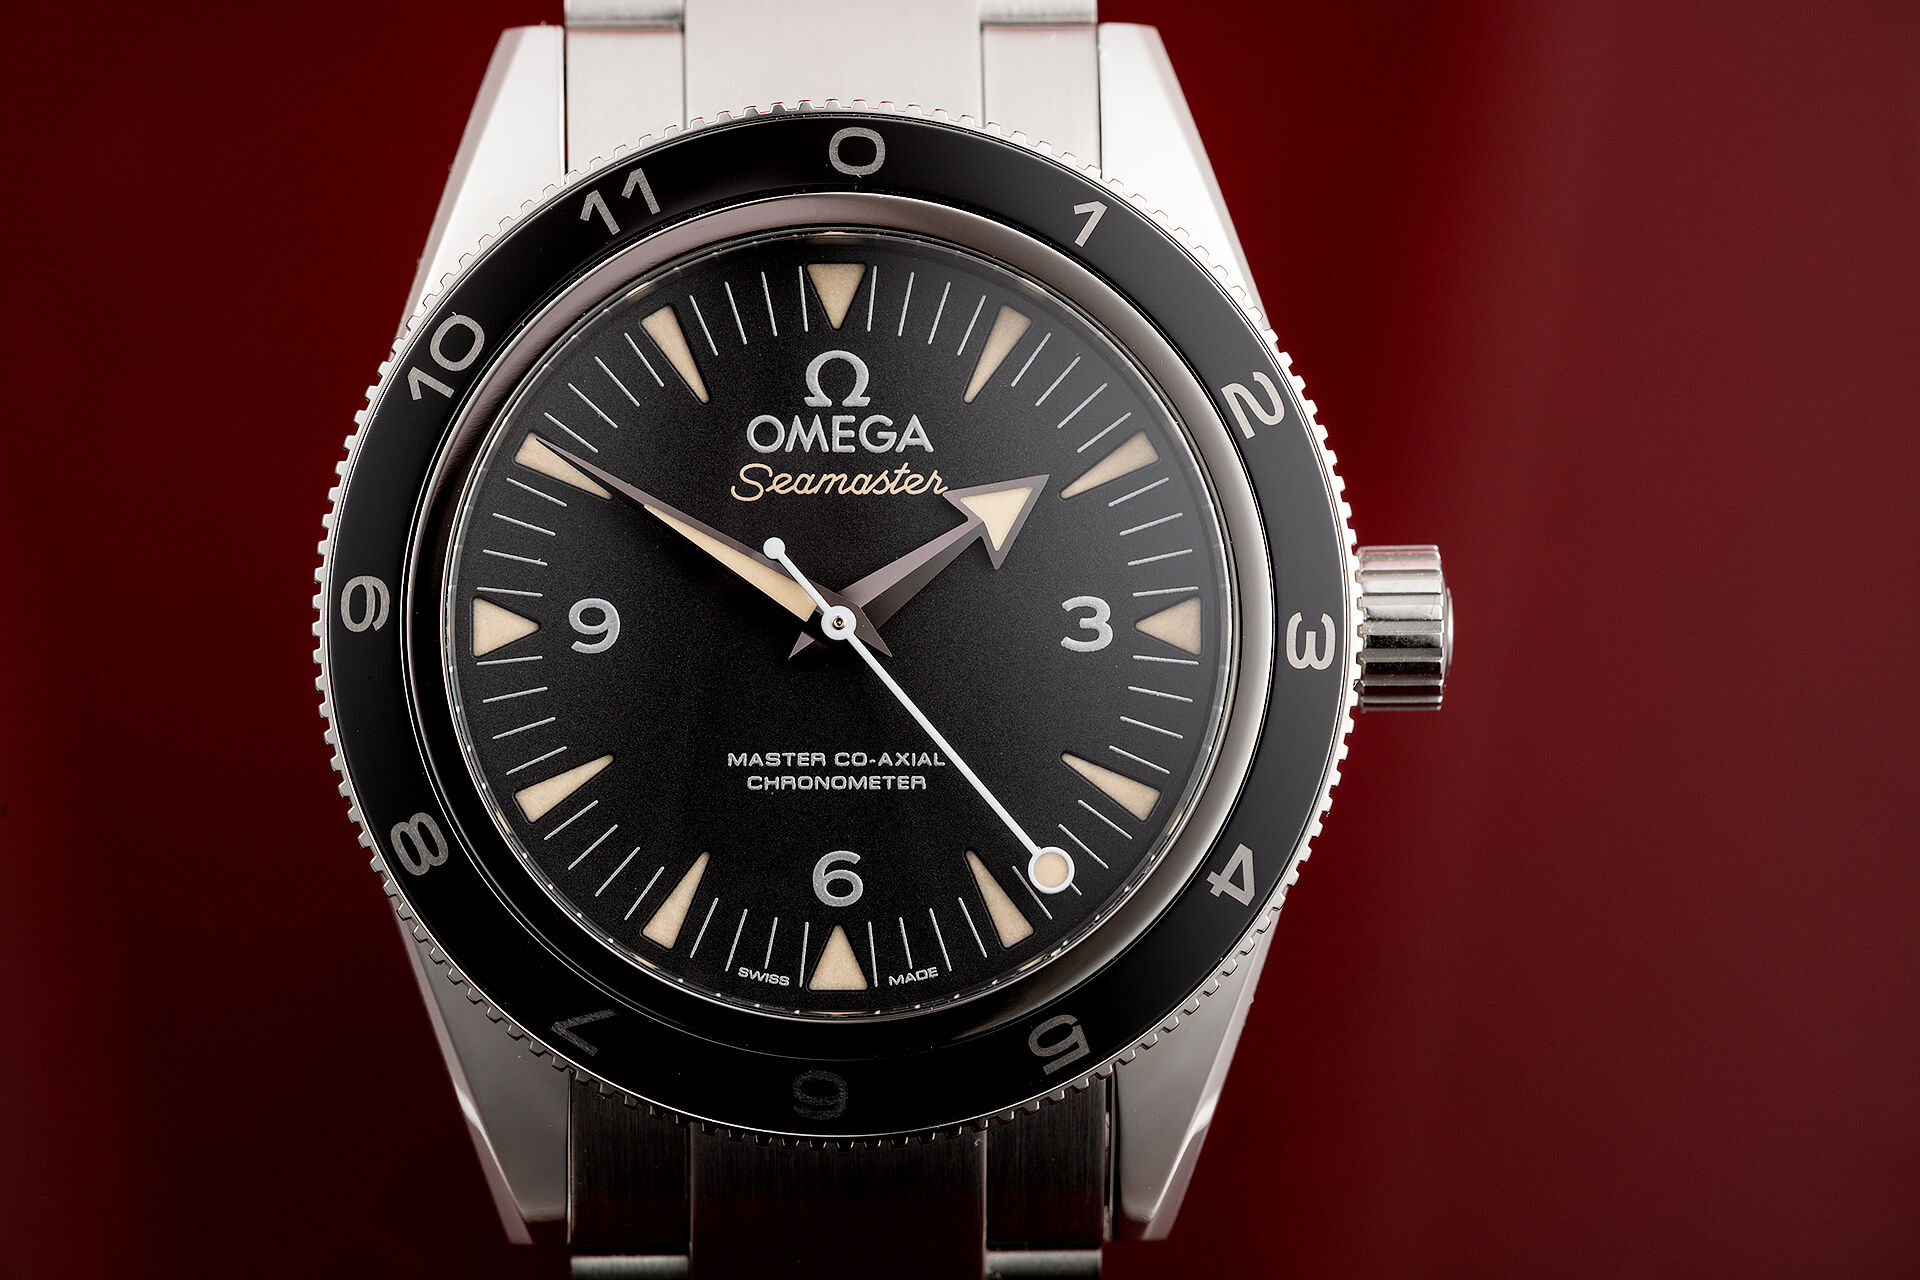 ref 233.32.41.21.01.001 | Limited Edition | Omega Seamaster Spectre